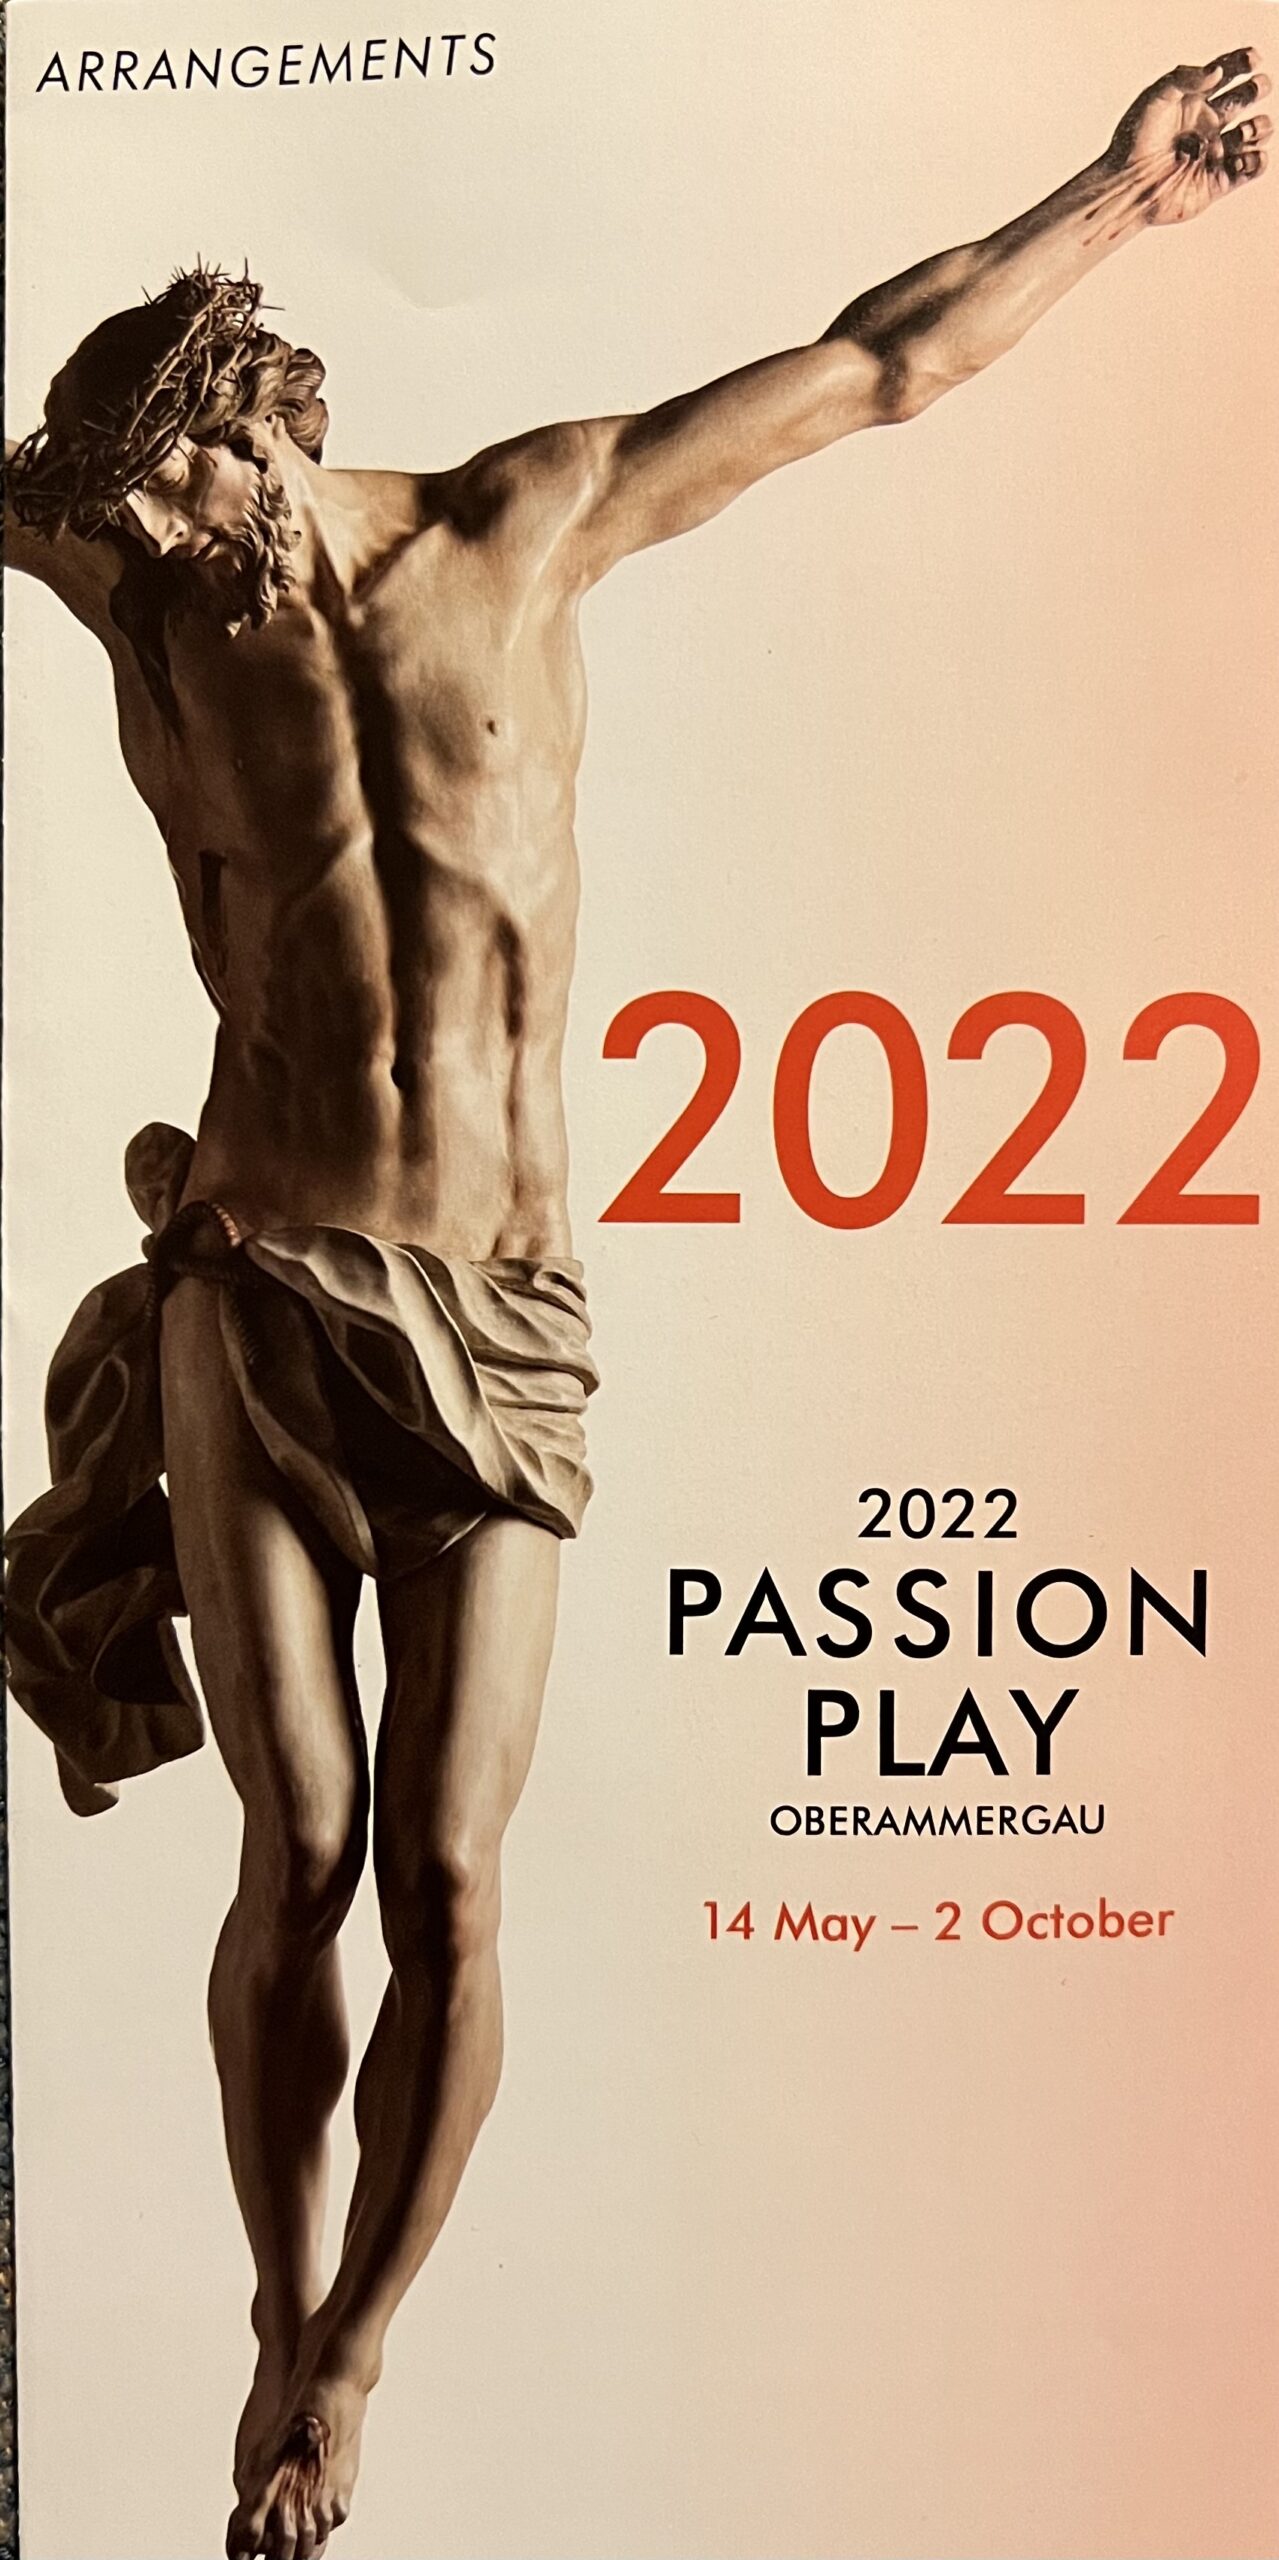 Passion play flyer